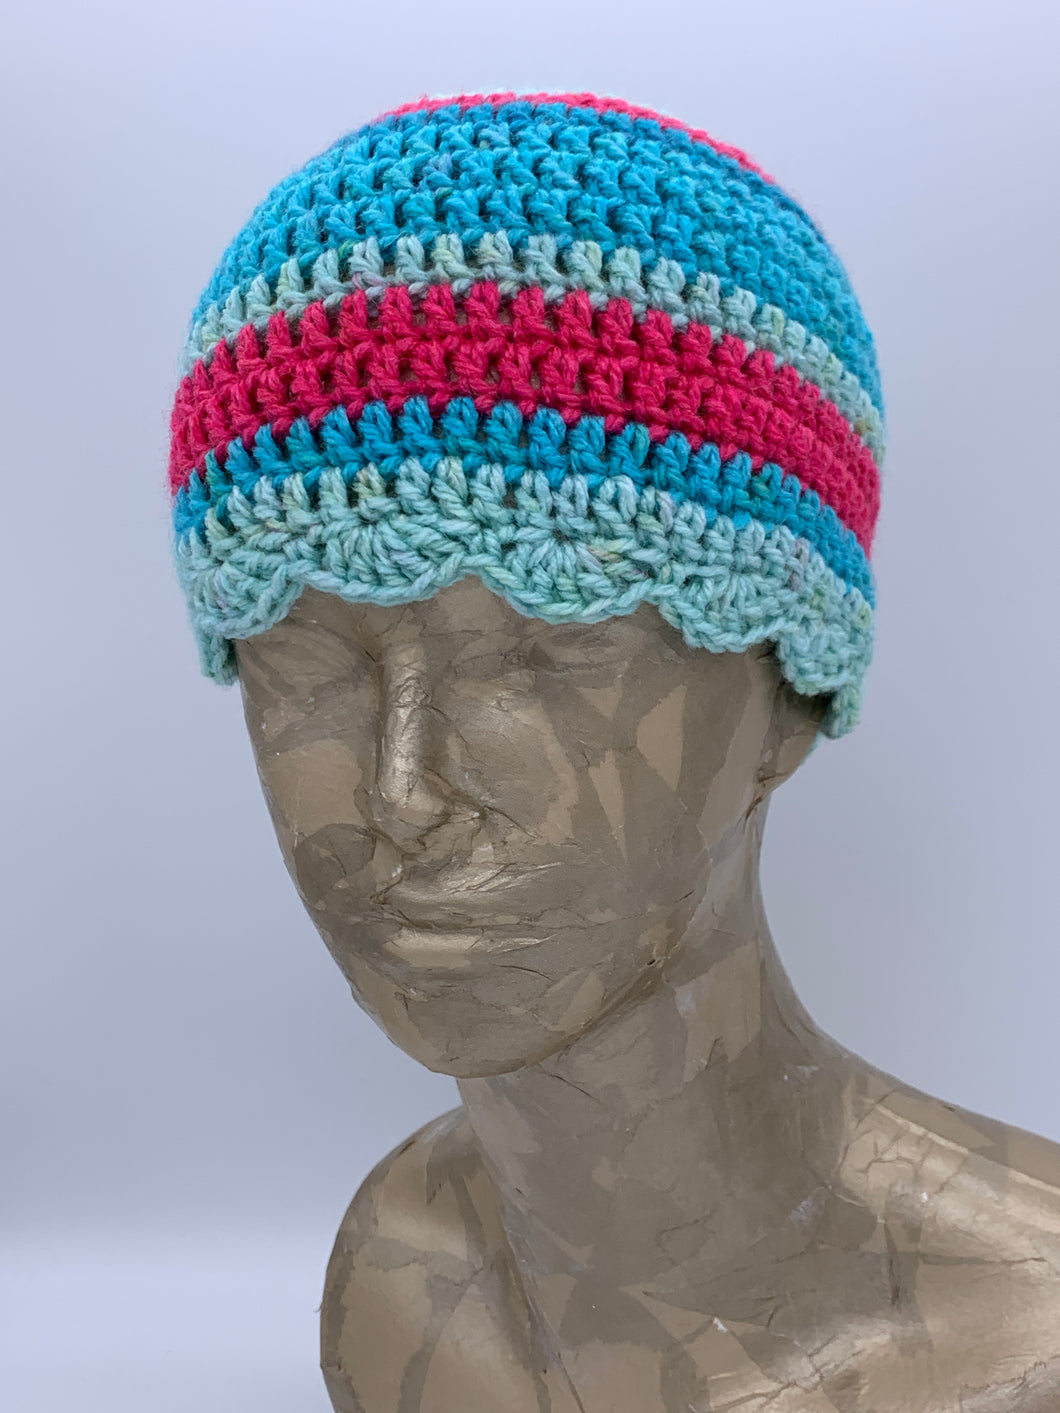 Crochet striped turquoise and pink beanie hat with scalloped edge- Size child 3-10 yrs